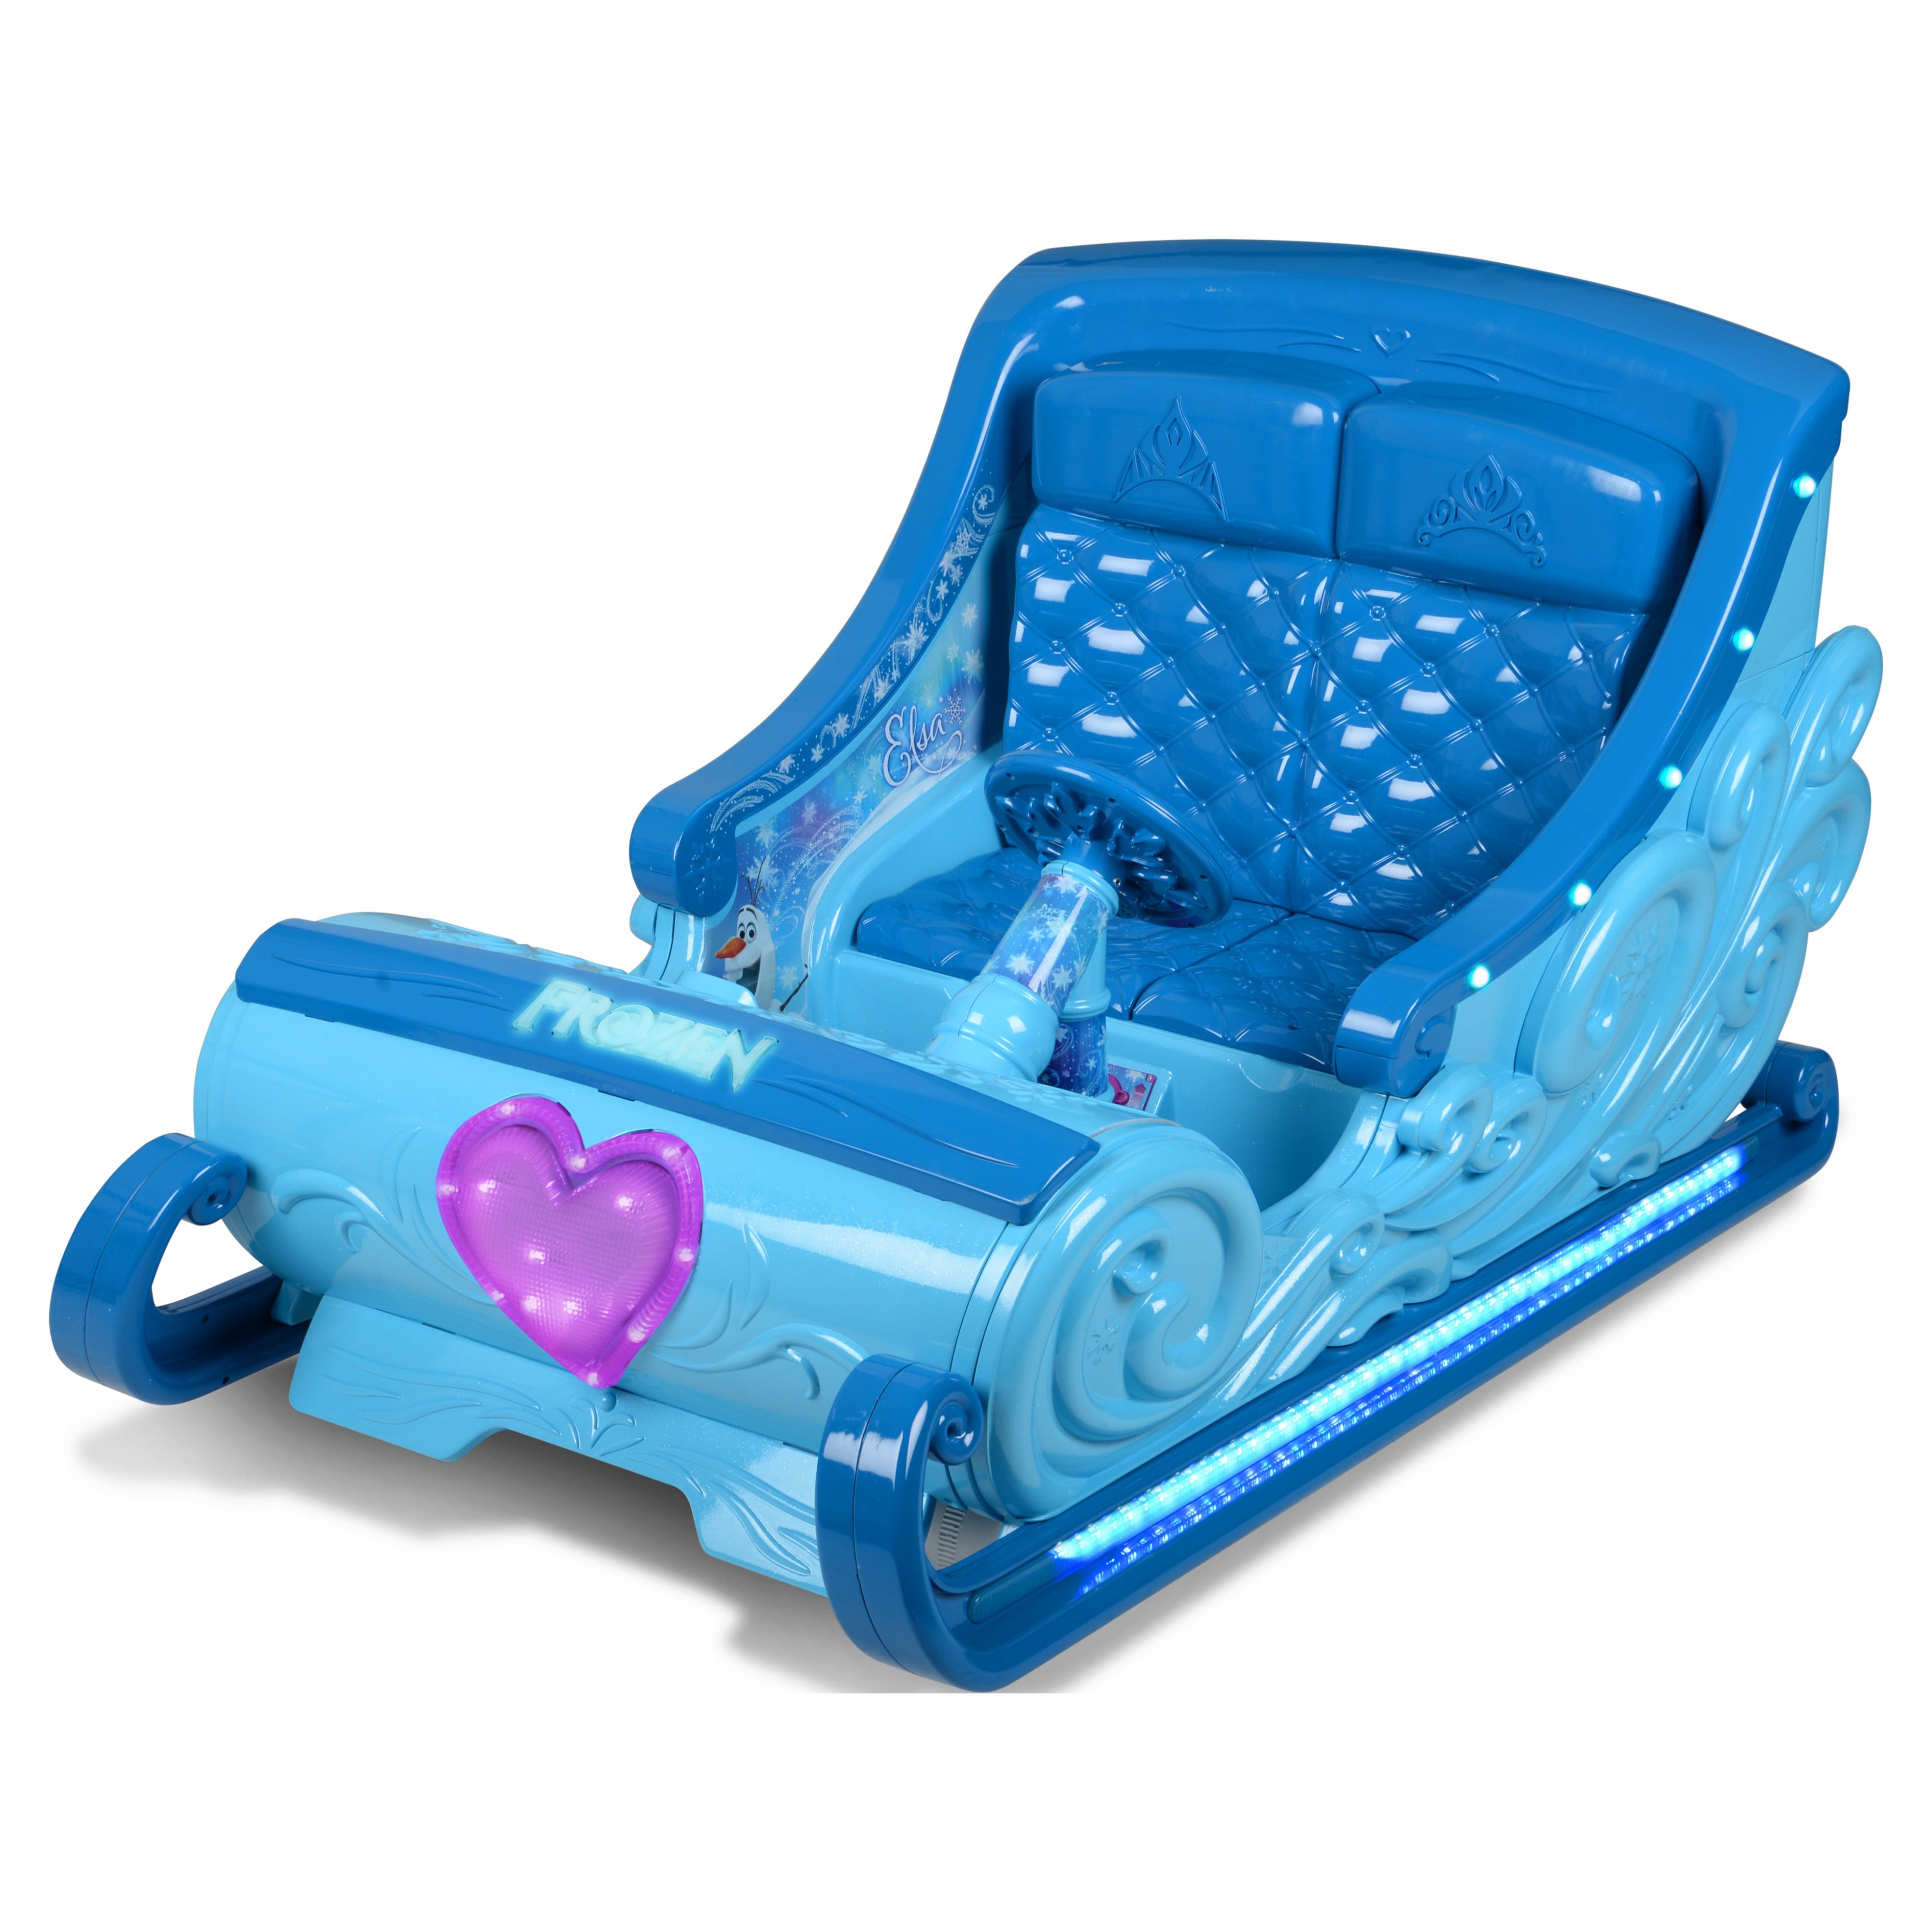 Disney Frozen Sleigh 12-Volt Battery Powered Ride-On for your little Elsa and Anna - Hours of Fun! - image 5 of 6